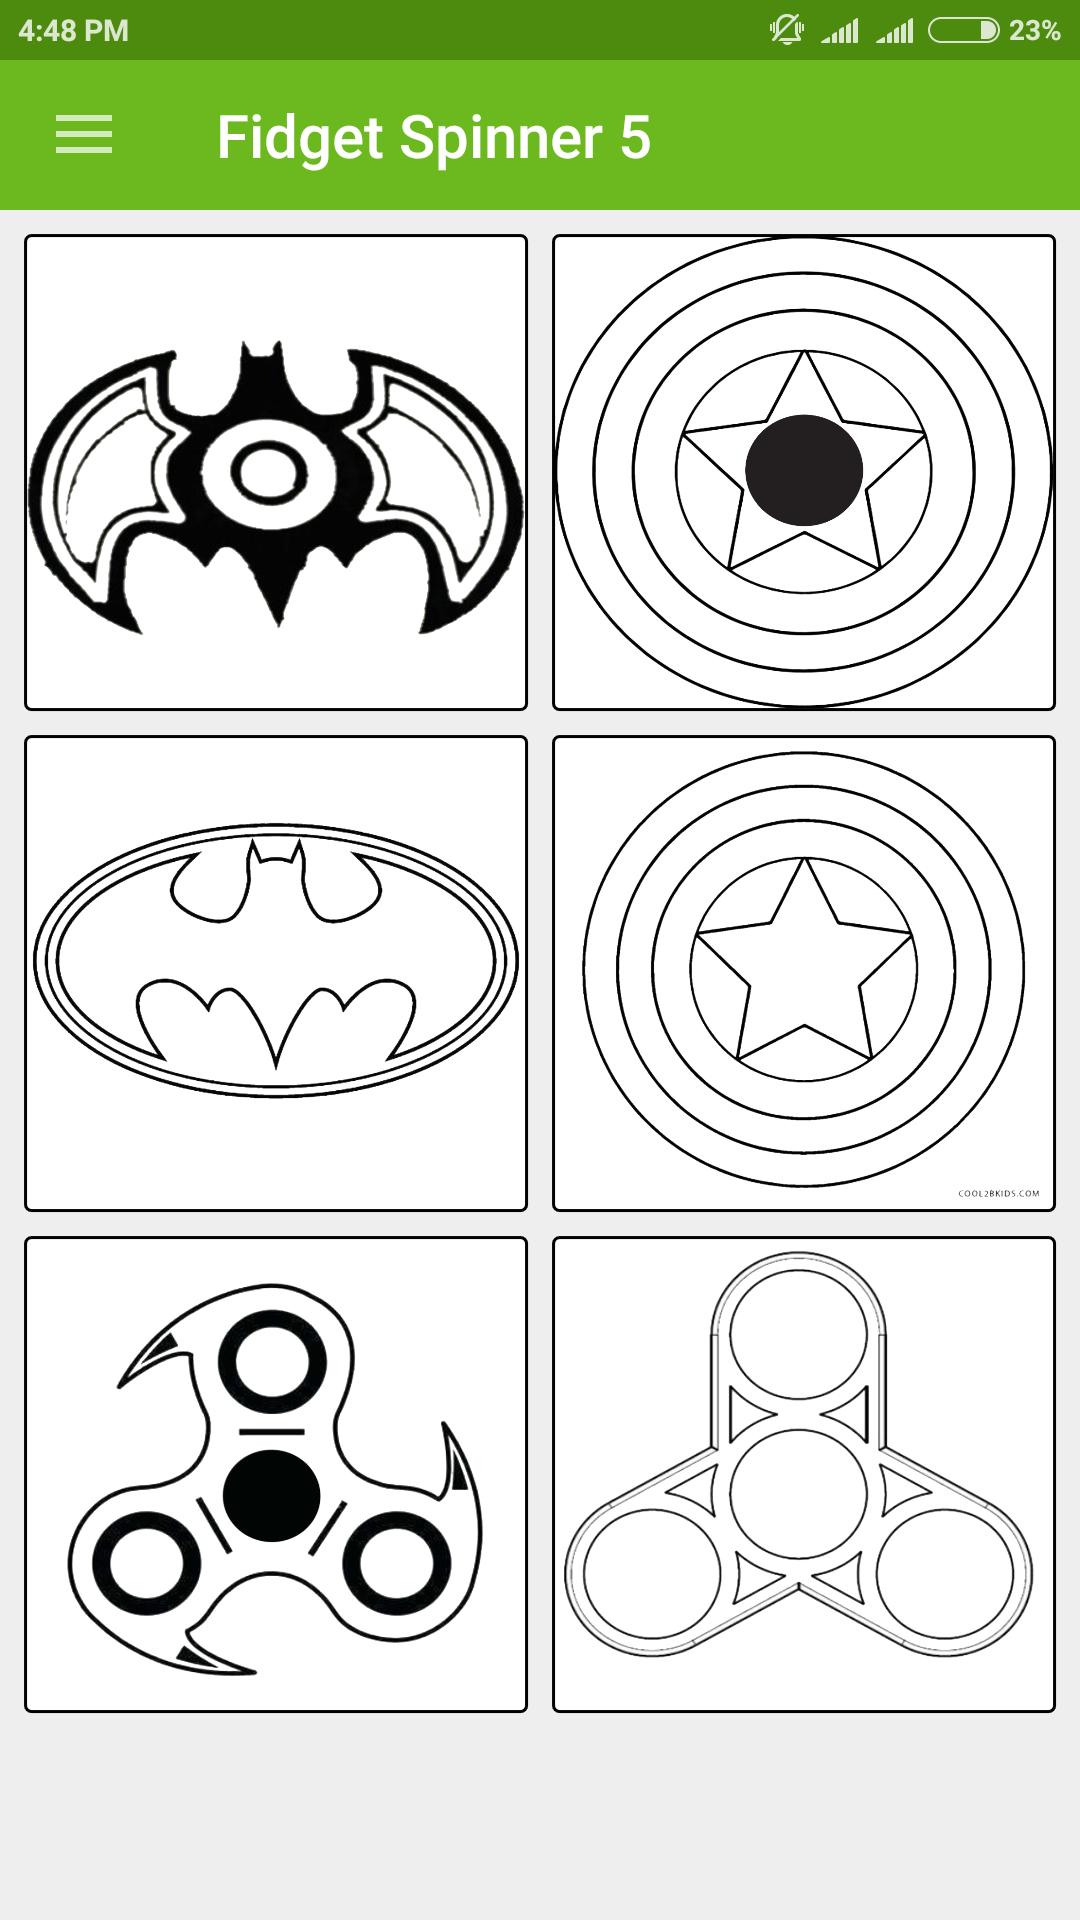 Fidget Spinner Coloring Pages for Preshcool for Android - APK Download